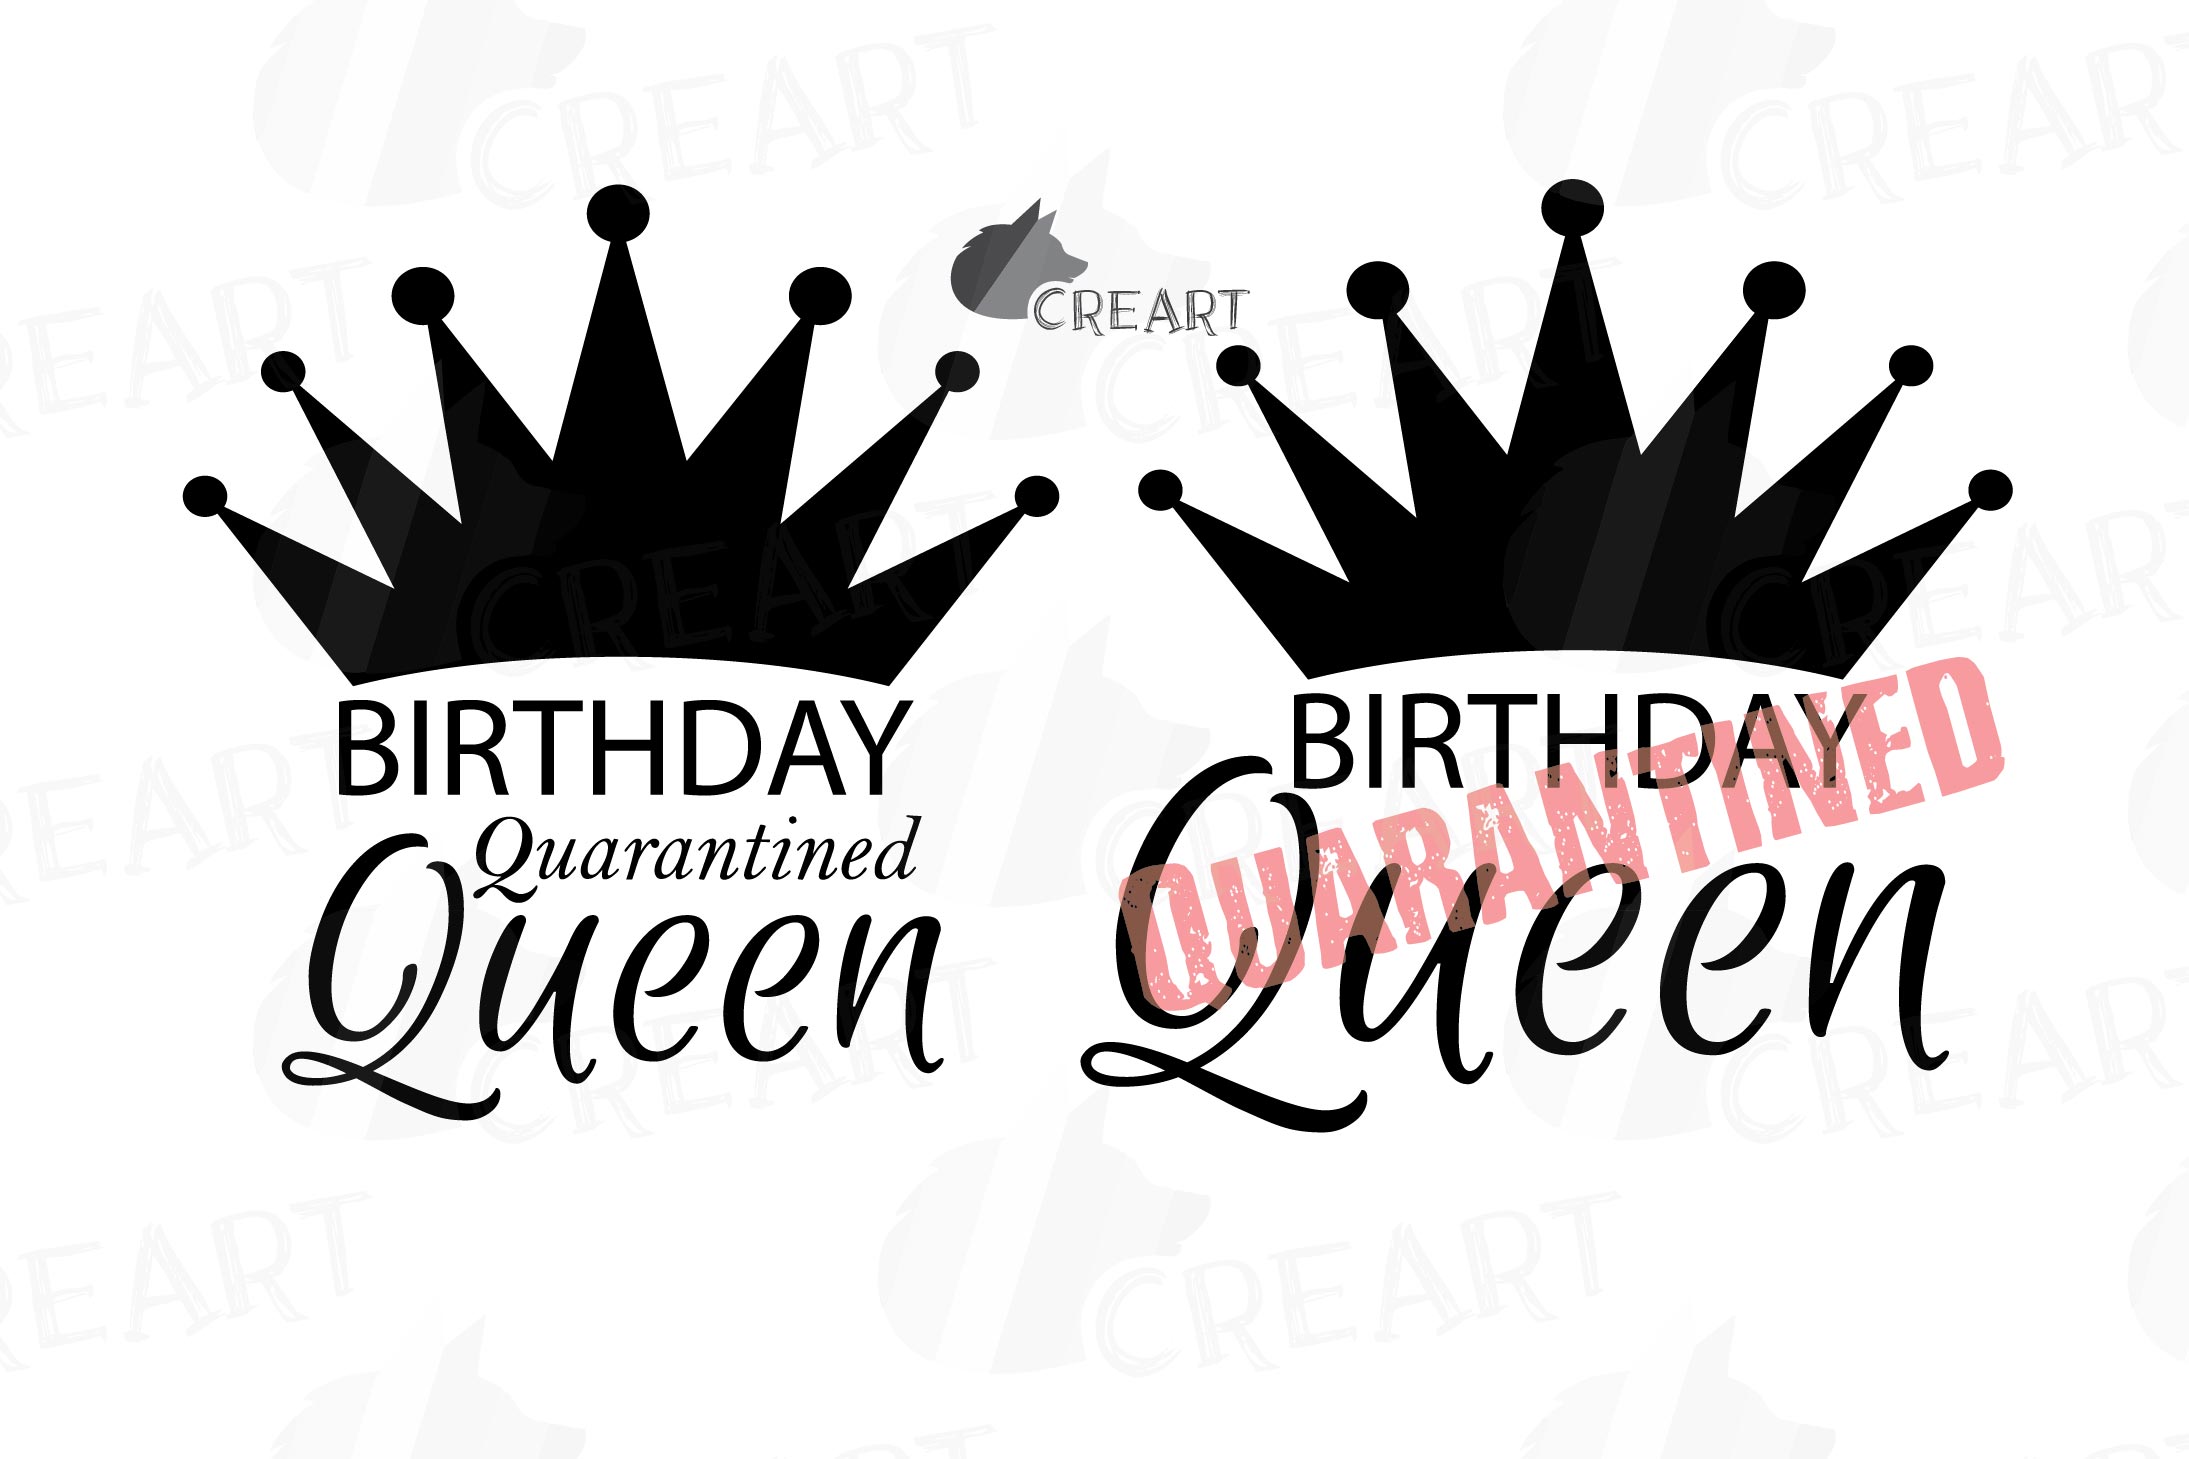 Quarantined Birthday Queen gift and decor svg cutting file.